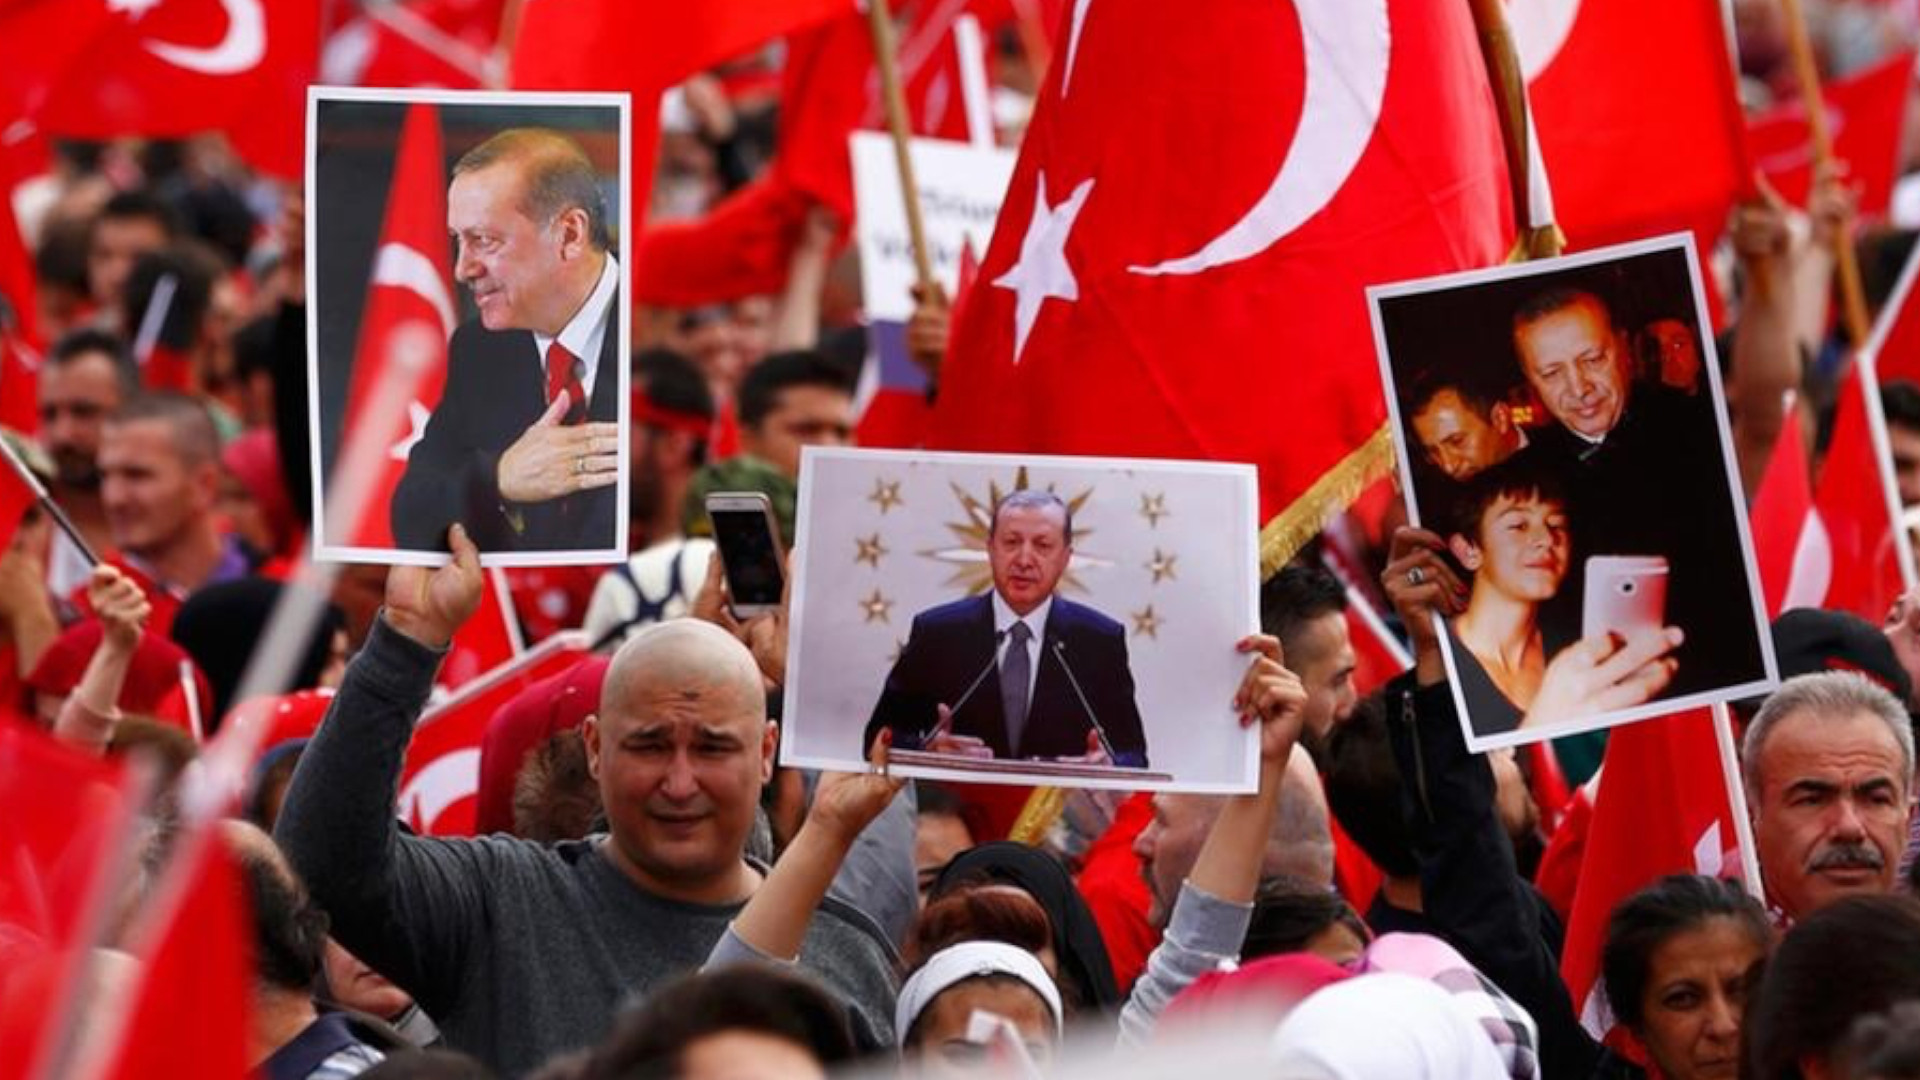 As Erdoğan gets aggressive, so do his supporters in Europe